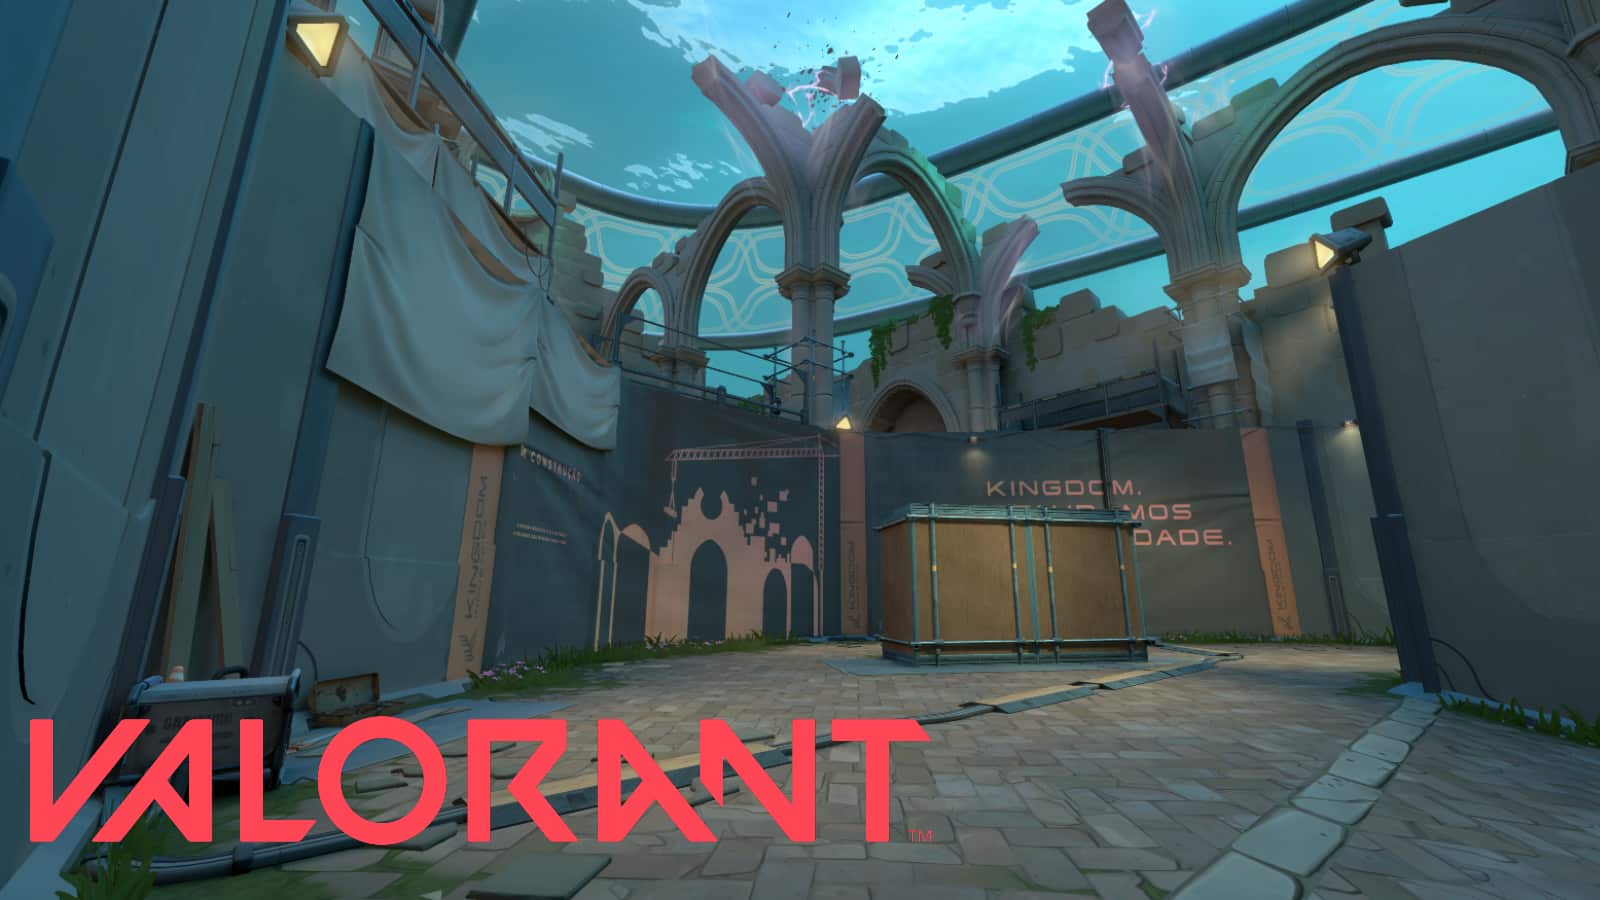 🎮 When Does the New 'Pitt / Pearl' Valorant Map Come Out?